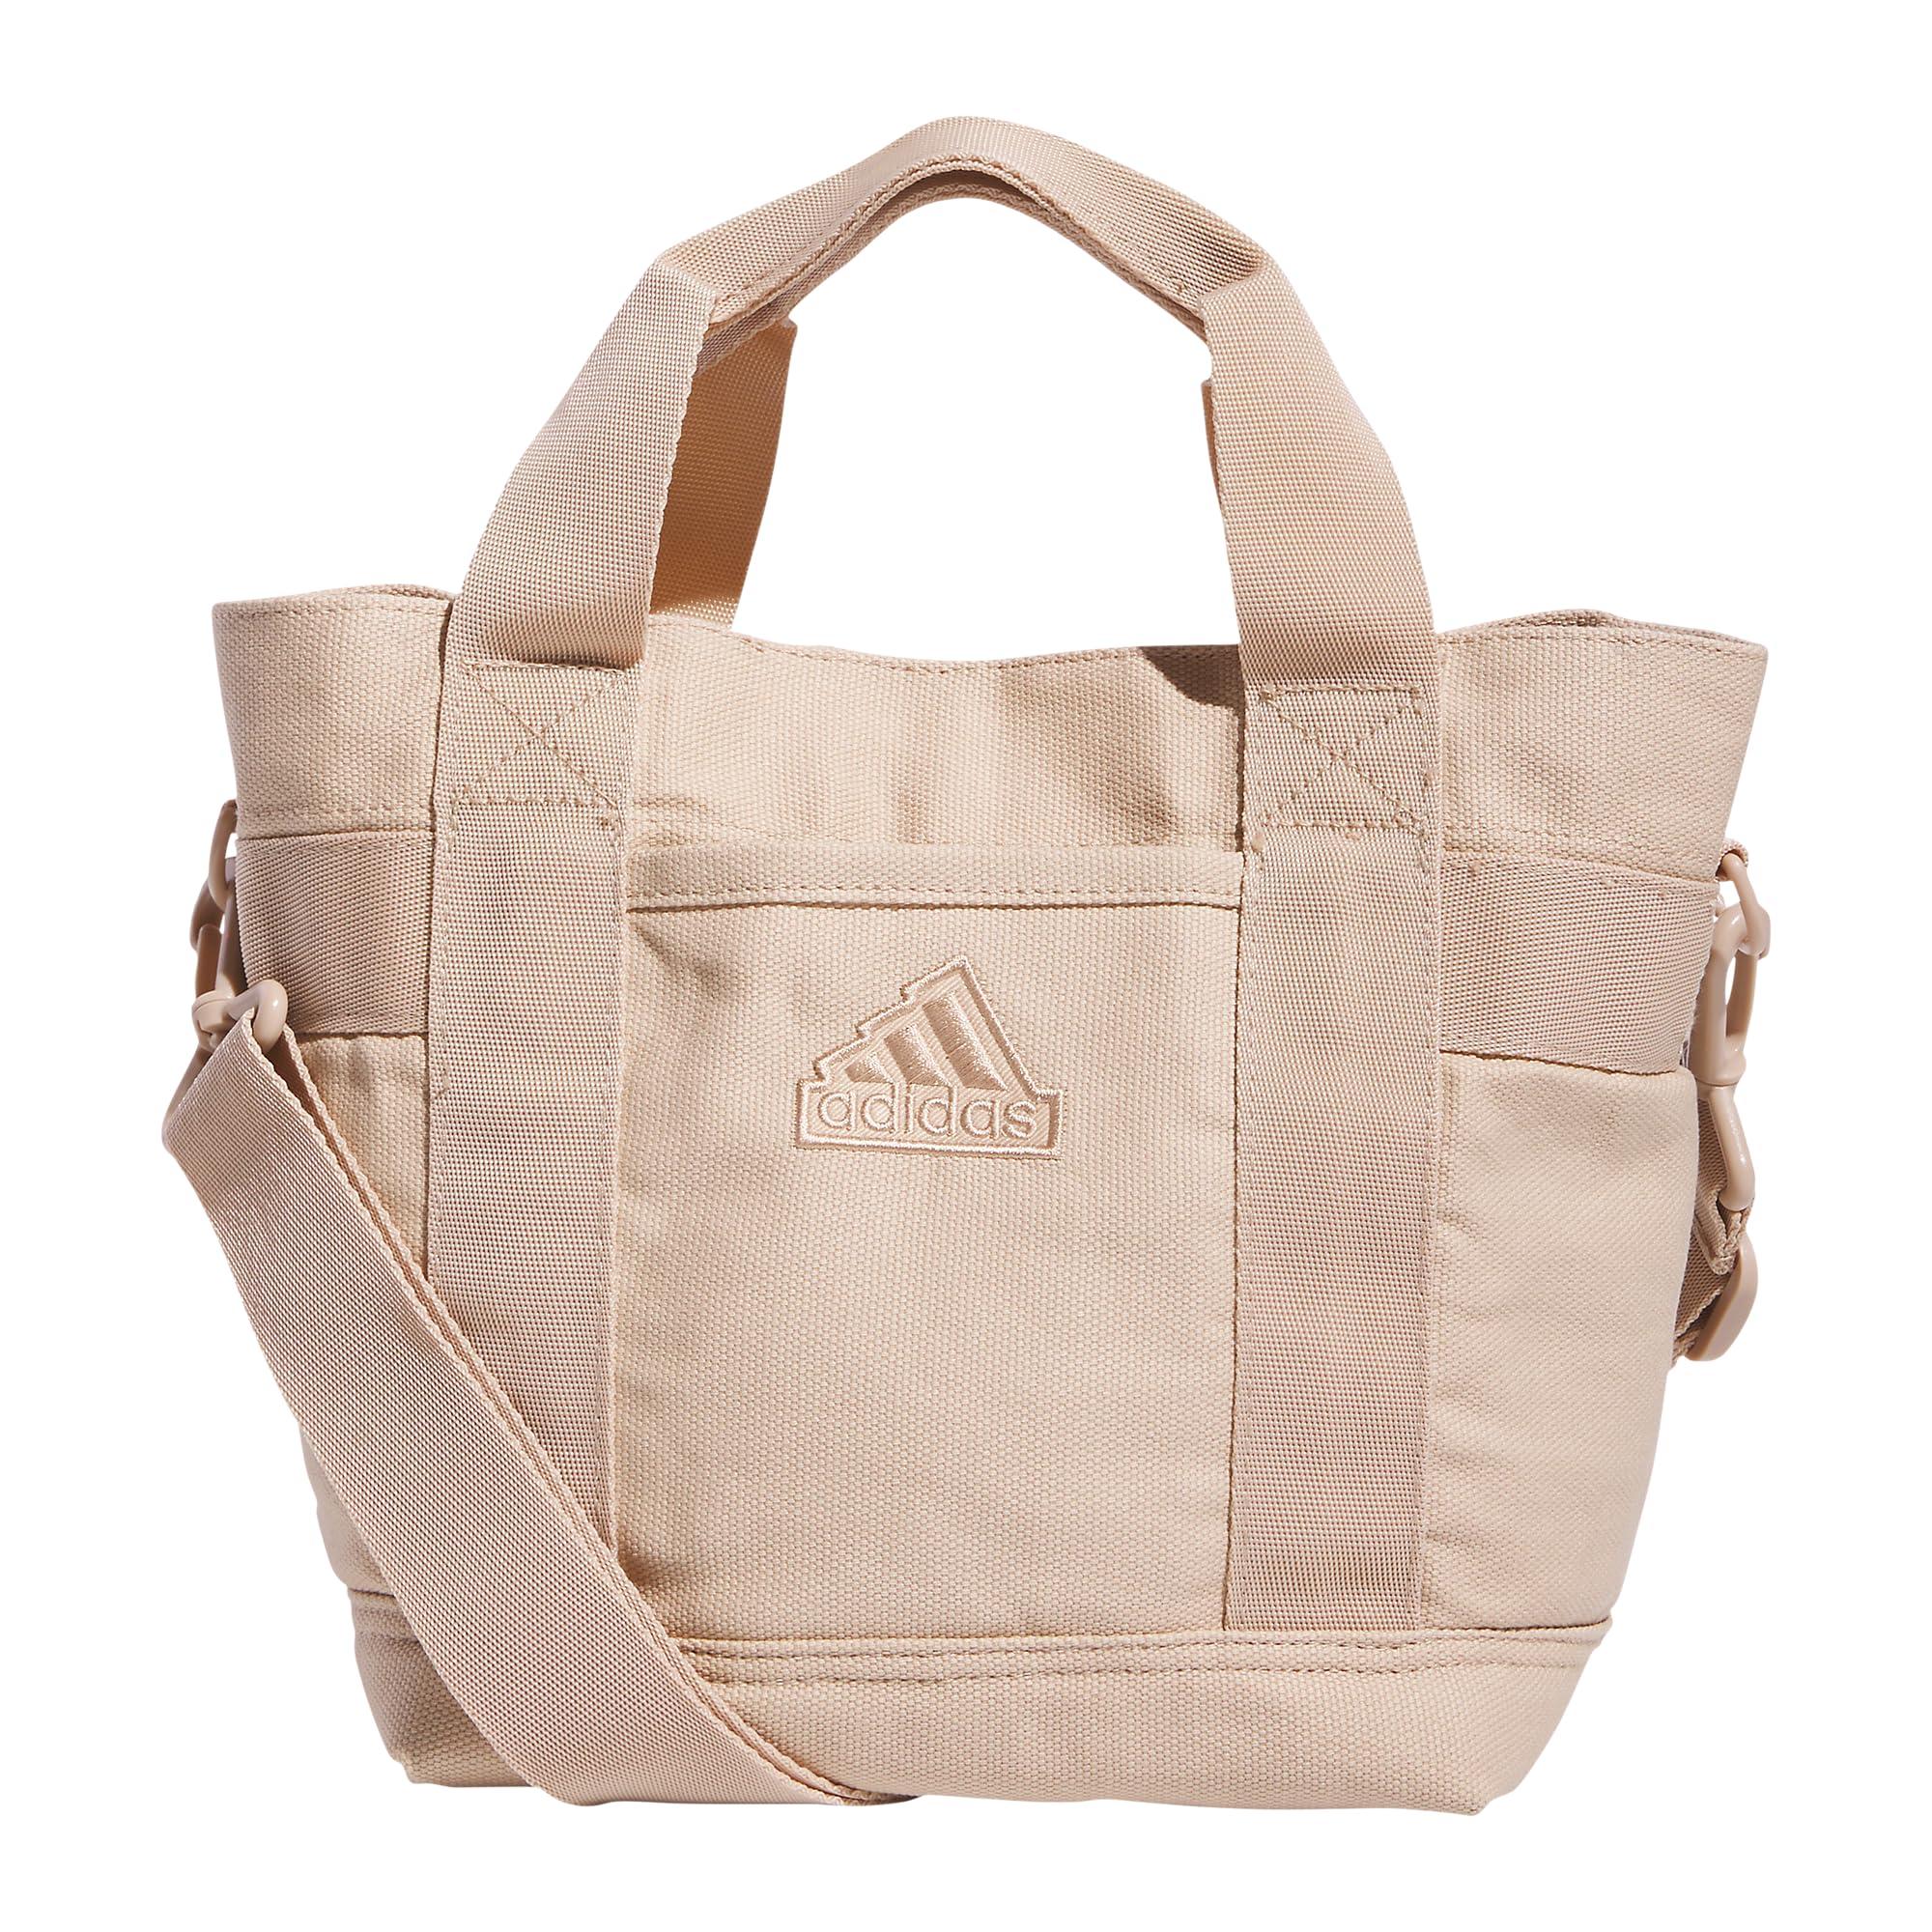 adidas Canvas Mini Small Tote Bag in Natural | Lyst